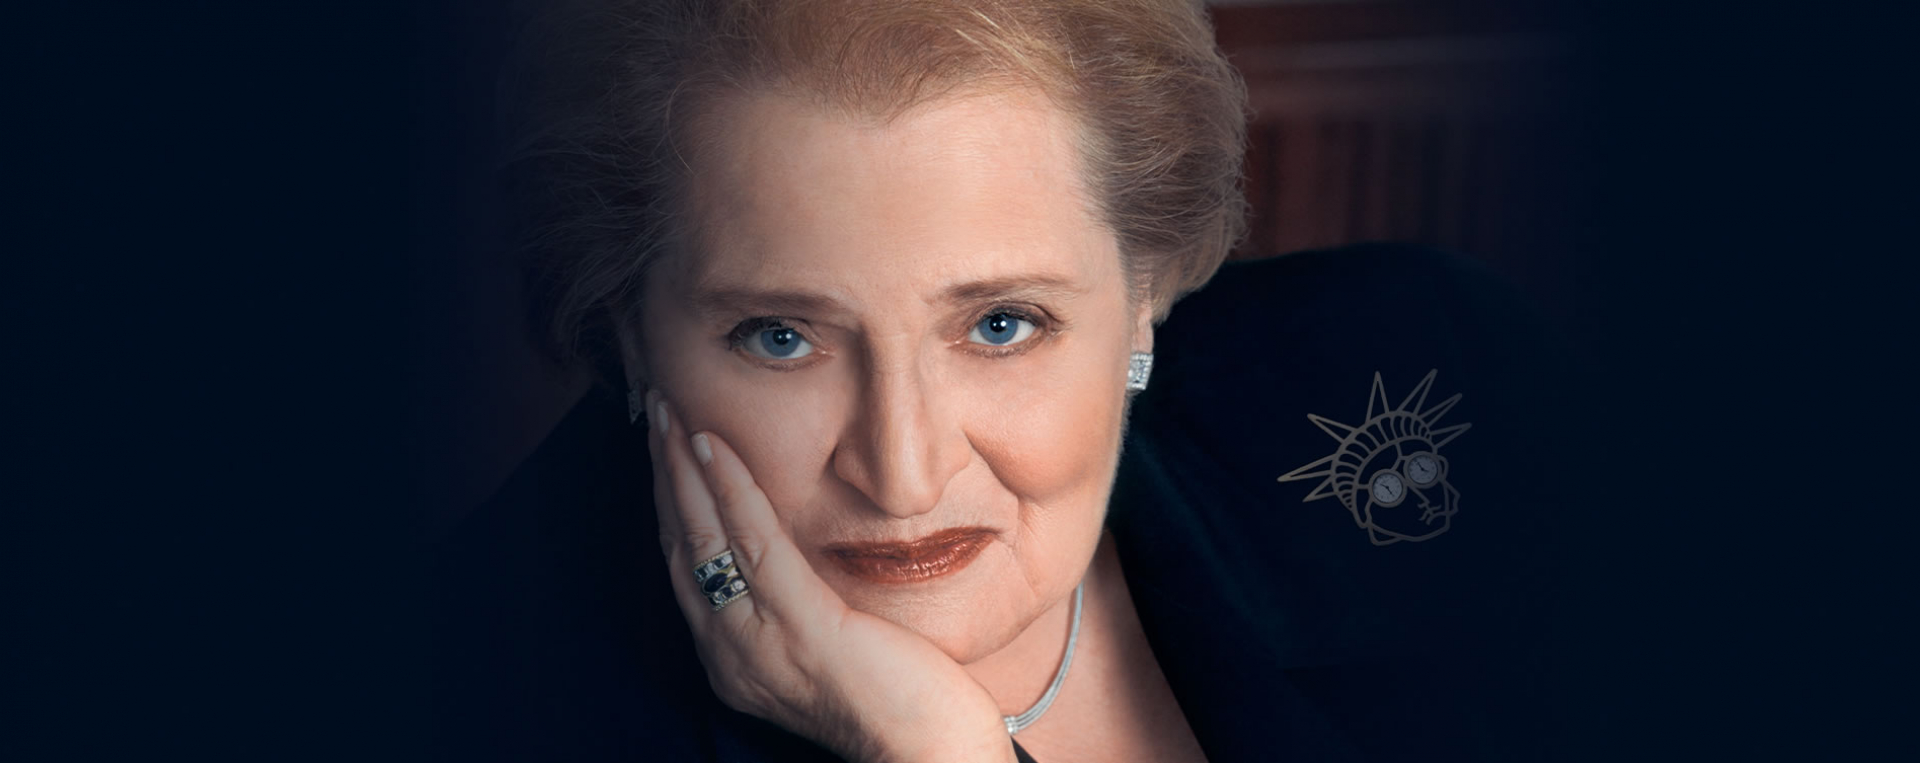 Read My Pins The Madeleine Albright Collection Bowers Museum